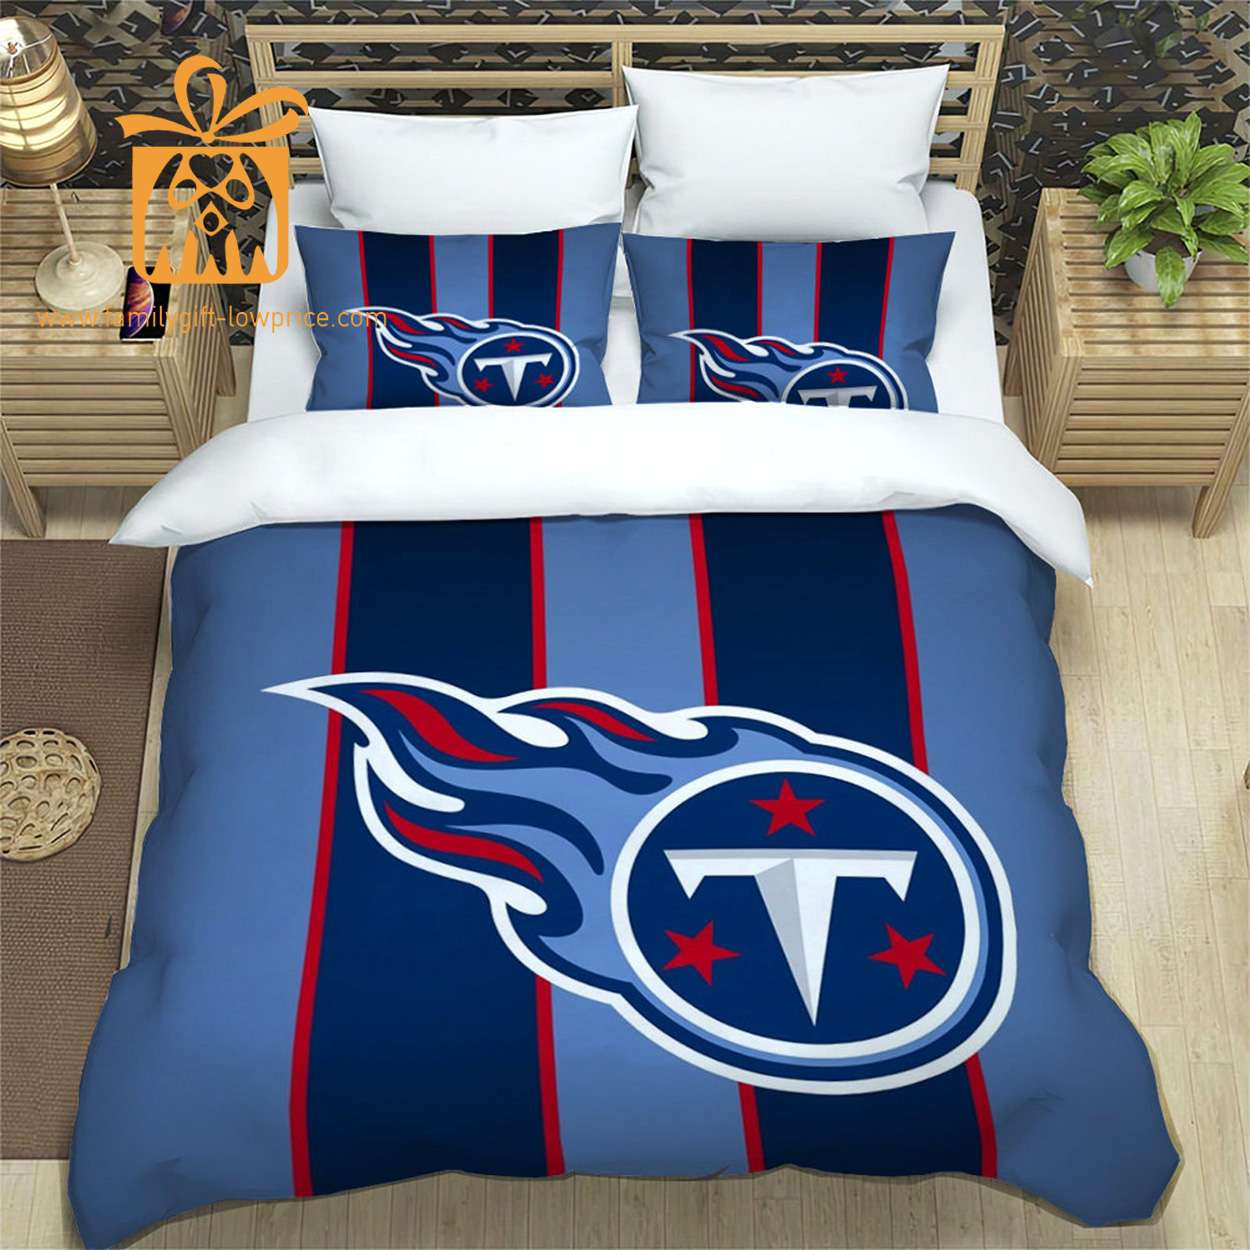 Tennessee Titans Bedding NFL Set, Custom Cute Bed Sets with Name & Number, Tennessee Titans Gifts